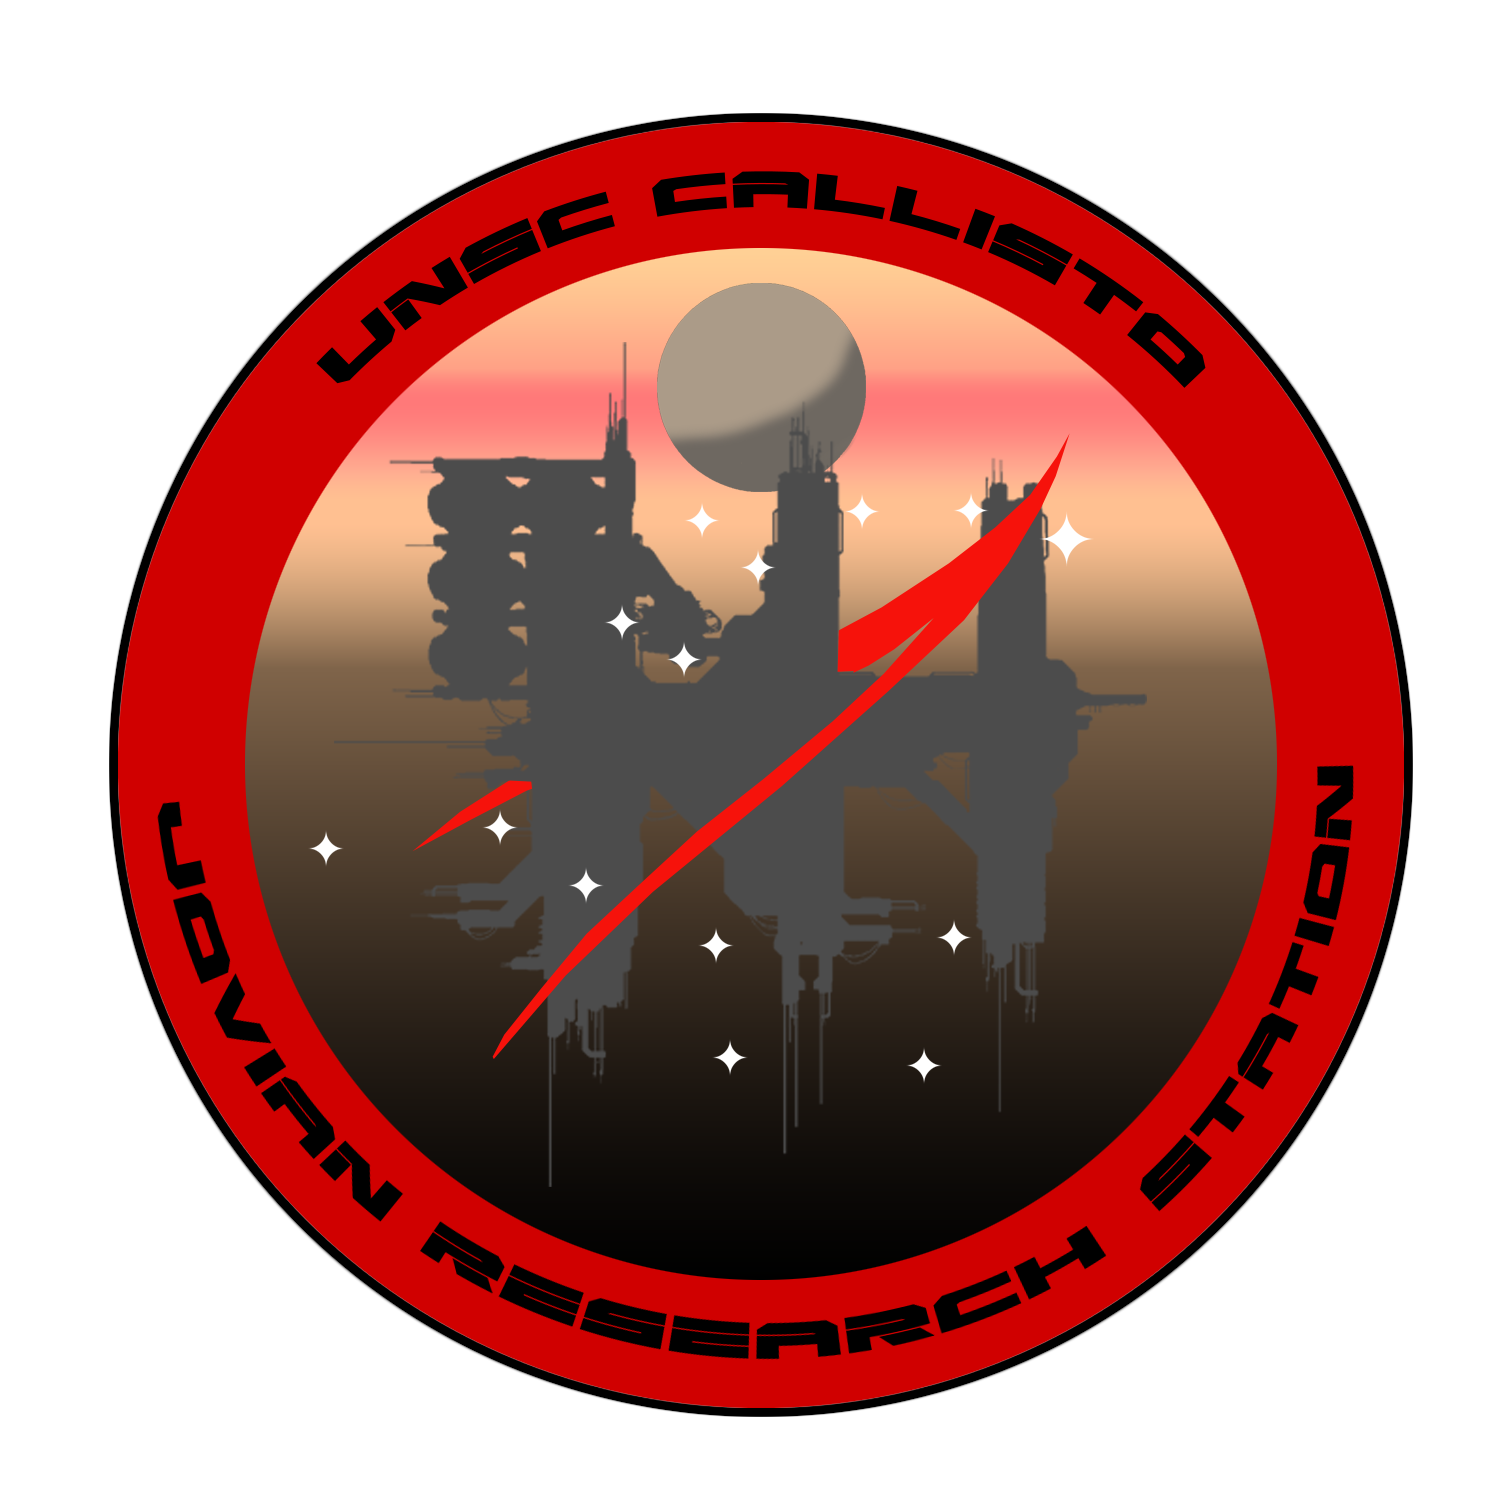 UNSC Callisto - Mission patch for workers stationed on the UNSC Callisto Orbital Research station. Vector version available upon request.